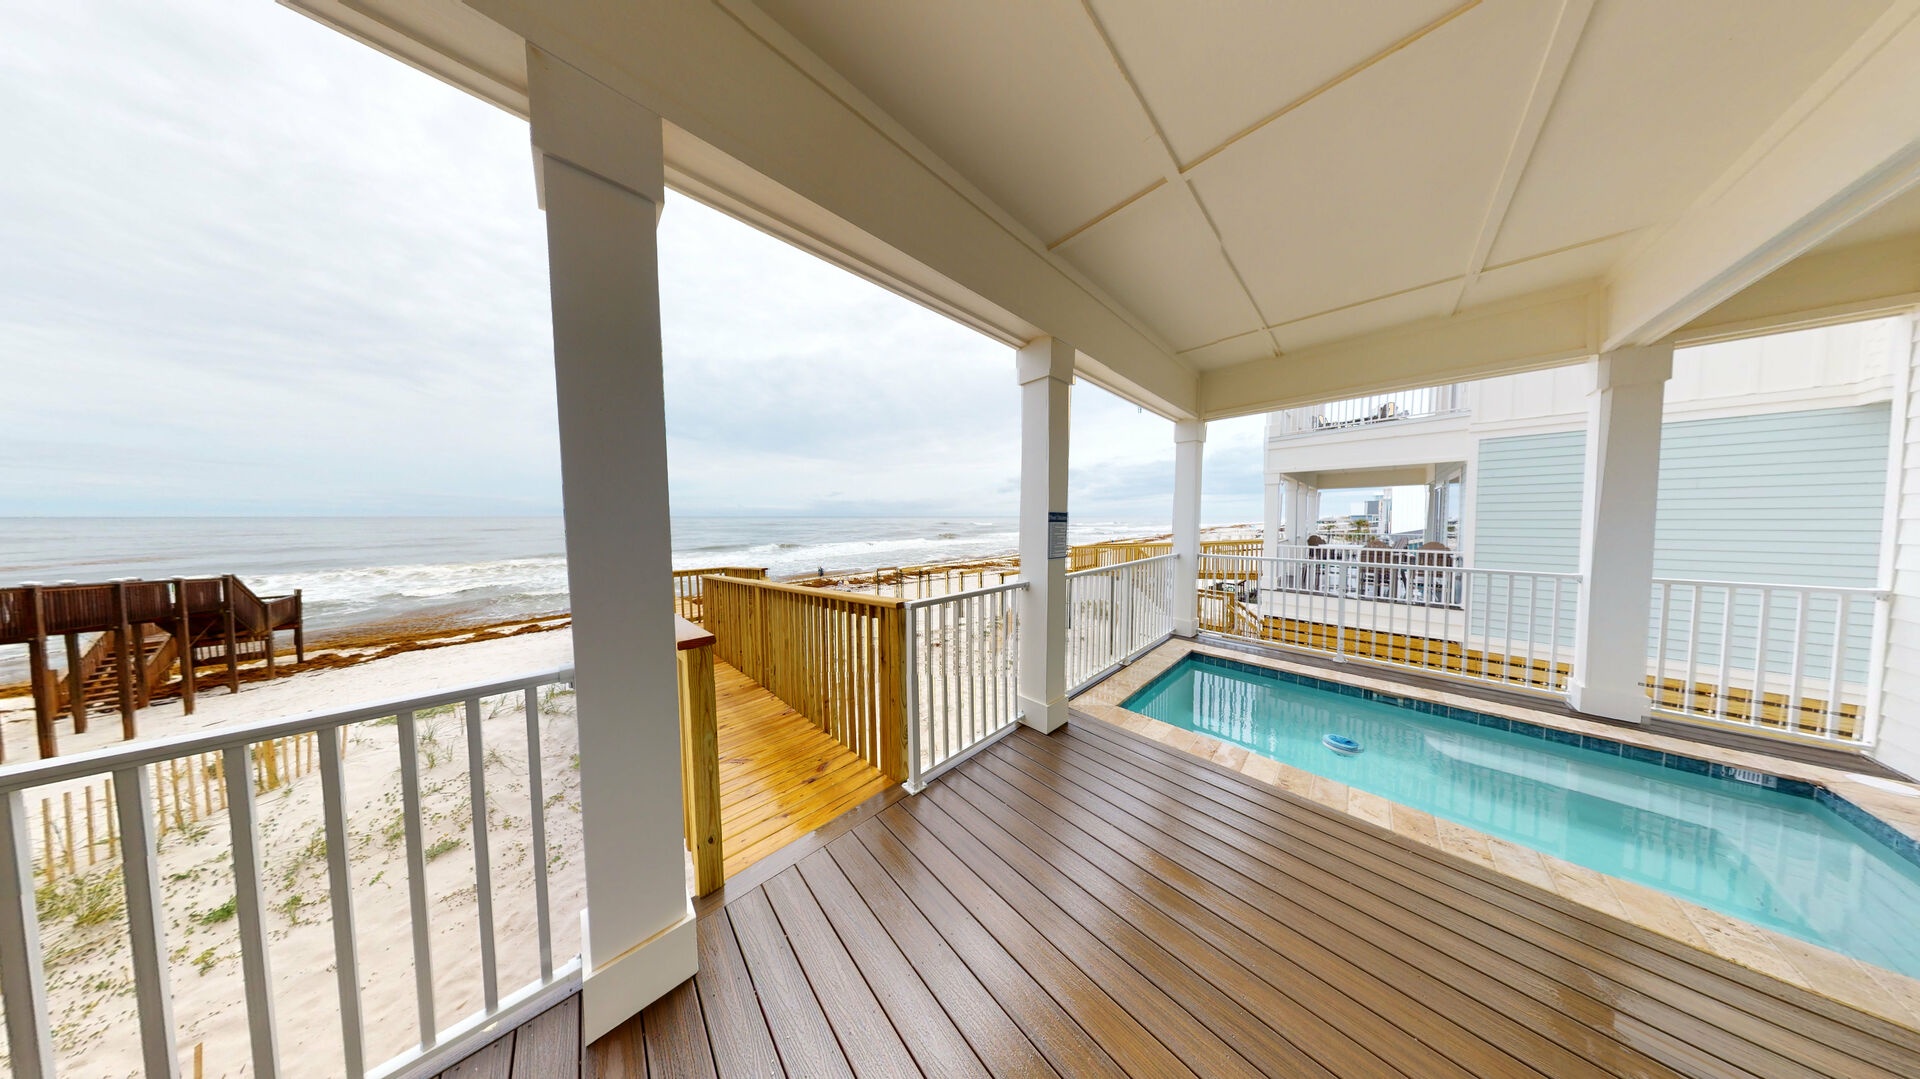 The private beachfront pool can be heated during the cooler months